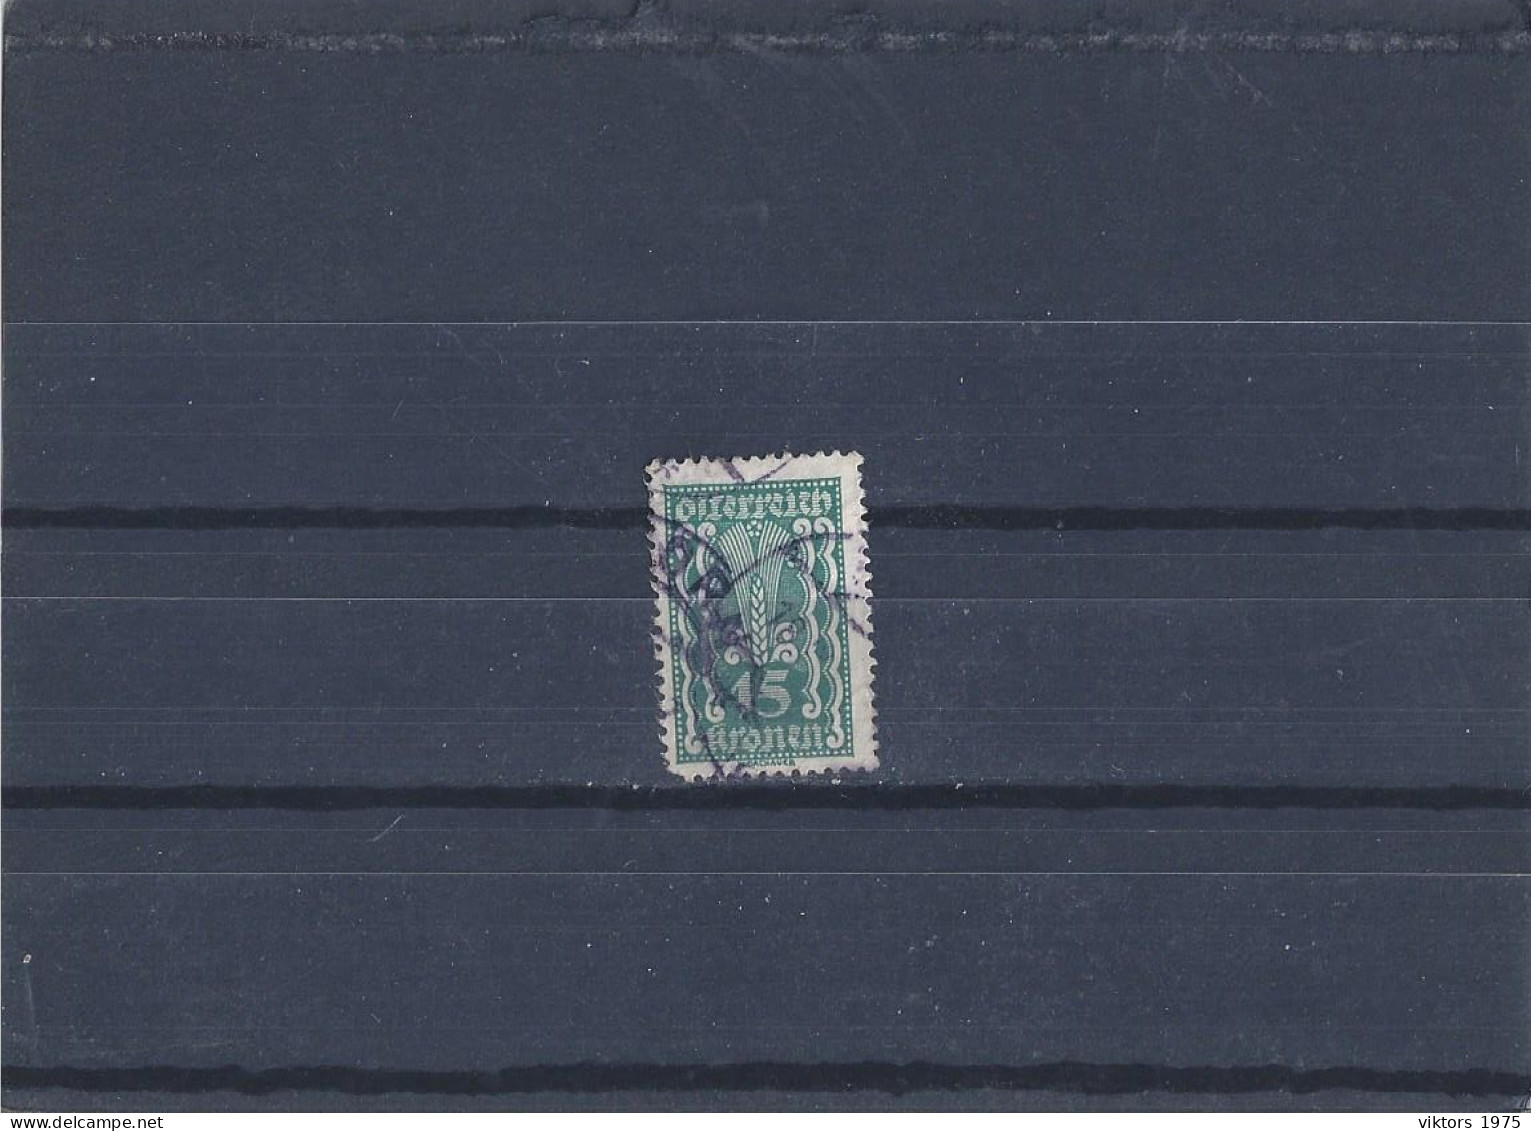 Used Stamp Nr.369 In MICHEL Catalog - Used Stamps